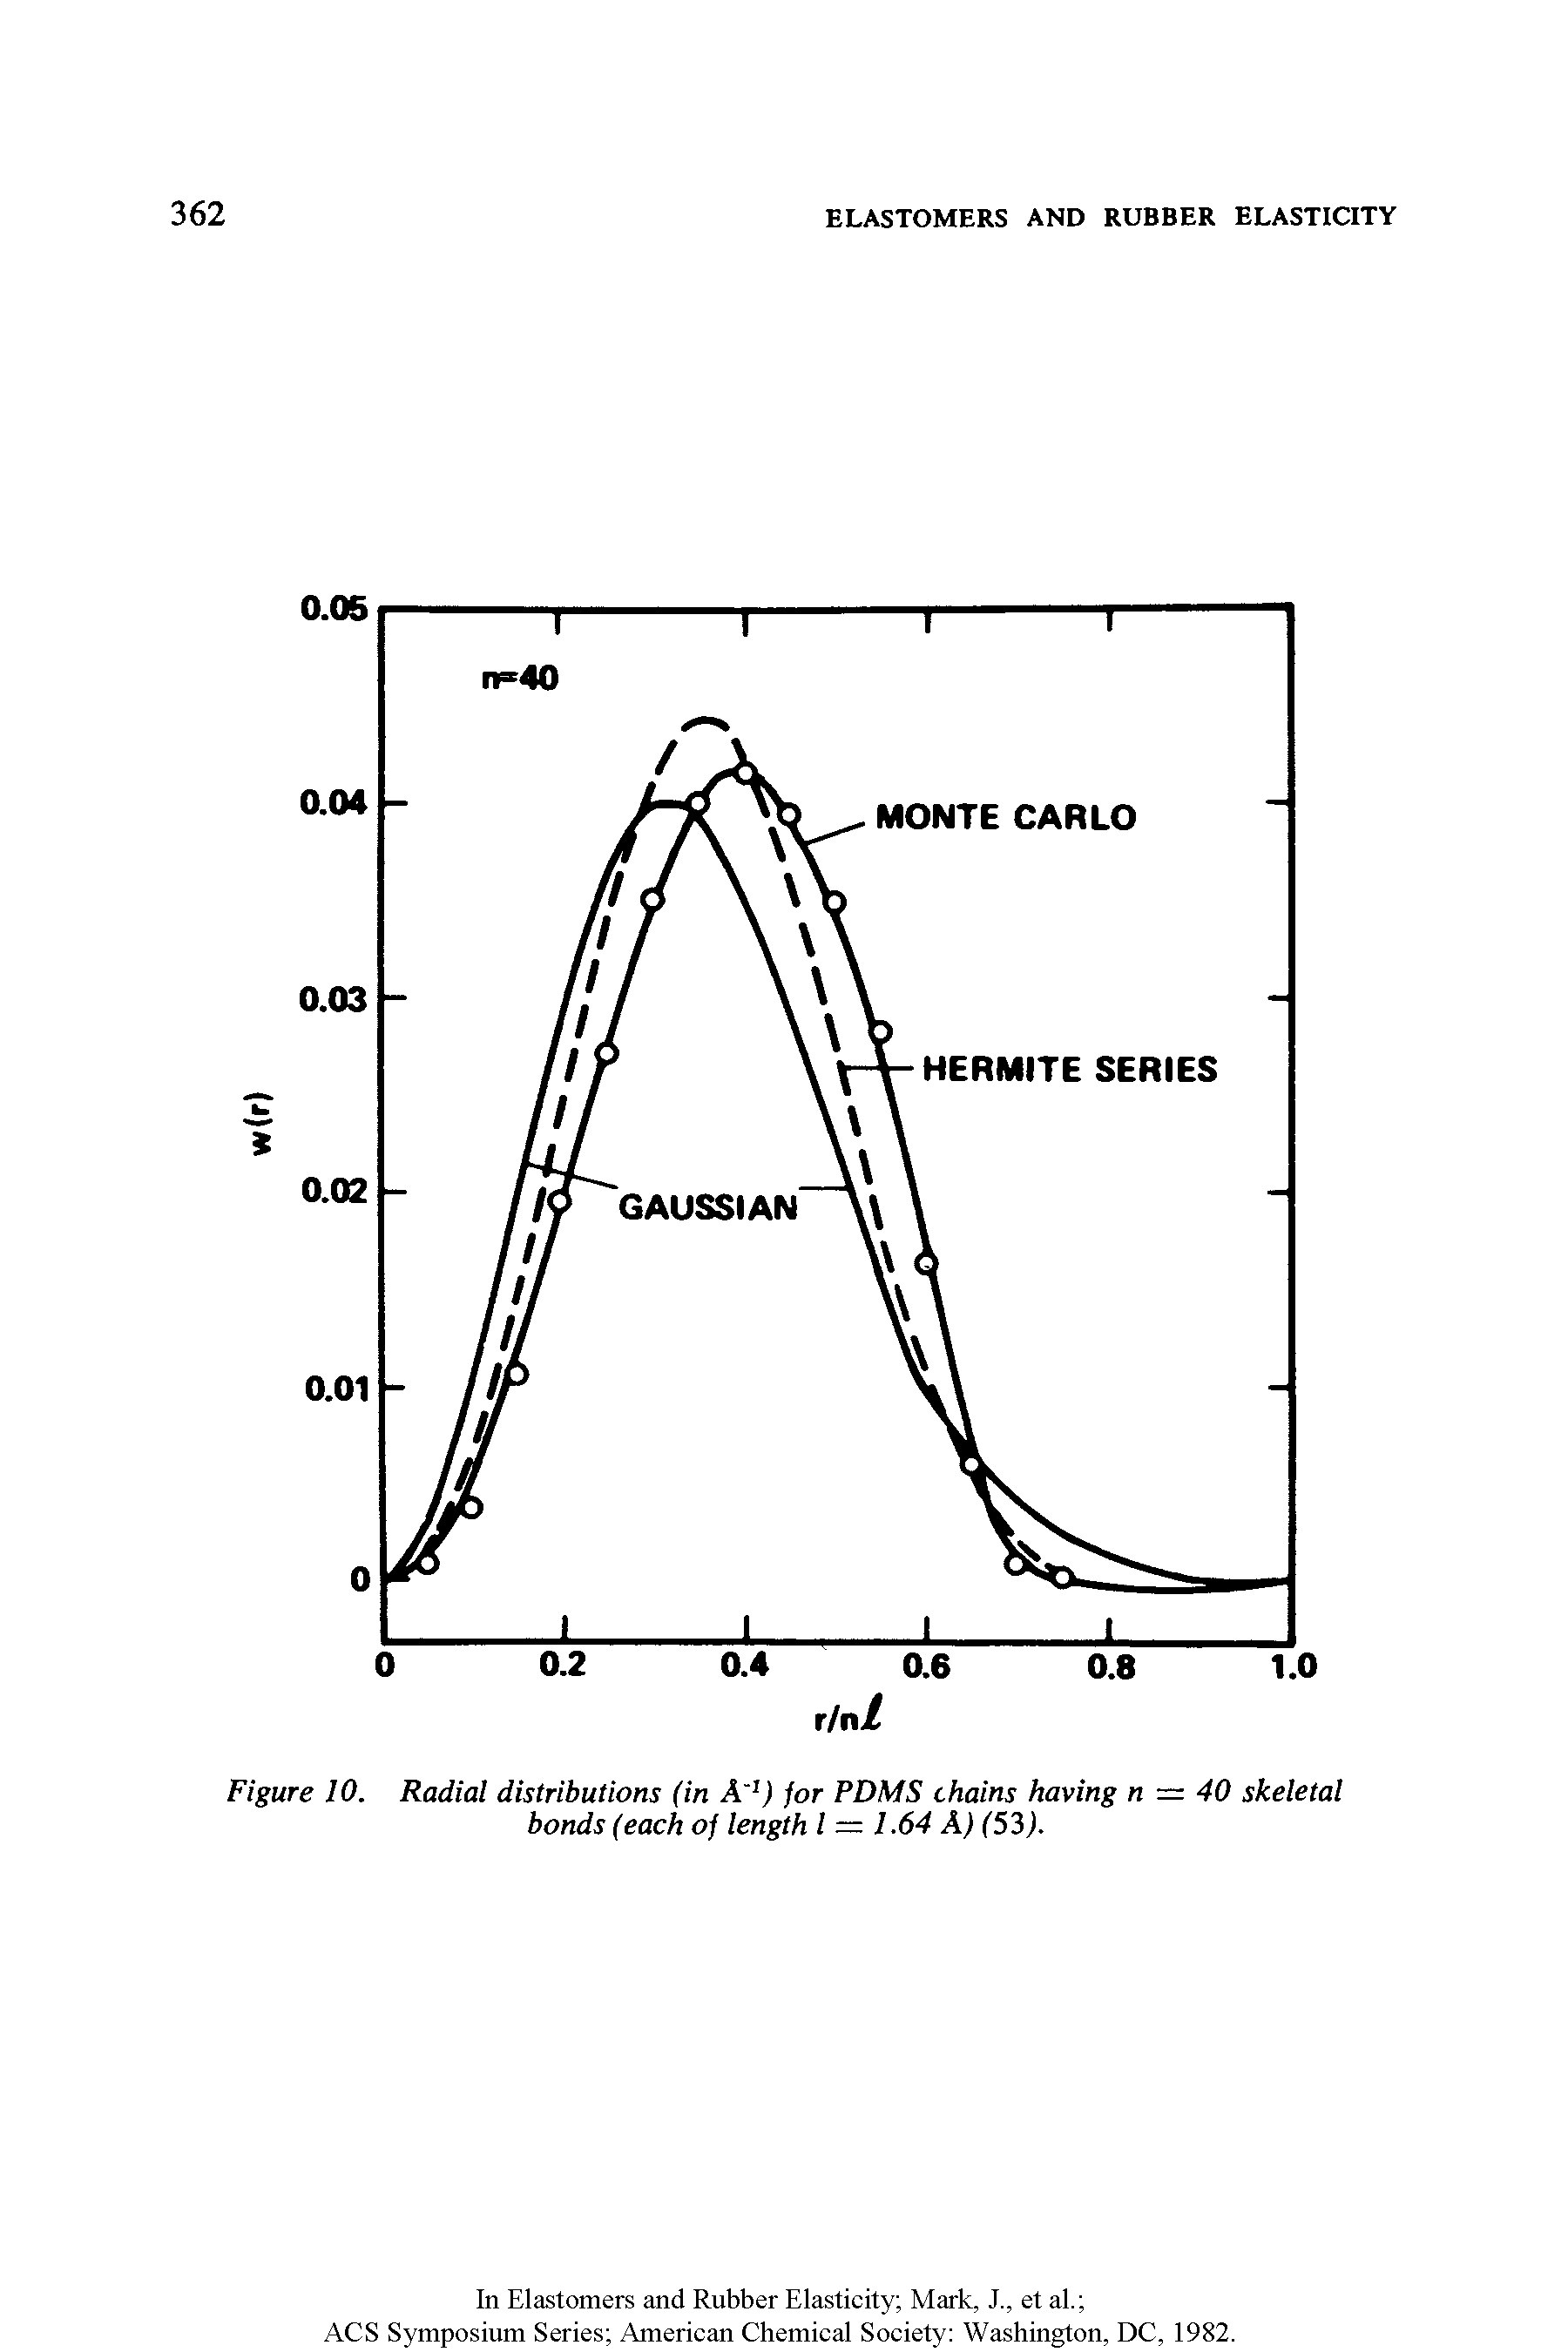 Figure 10. Radial distributions (in A 1) for PDMS chains having n = 40 skeletal bonds (each of length l = 1.64 A) (53).